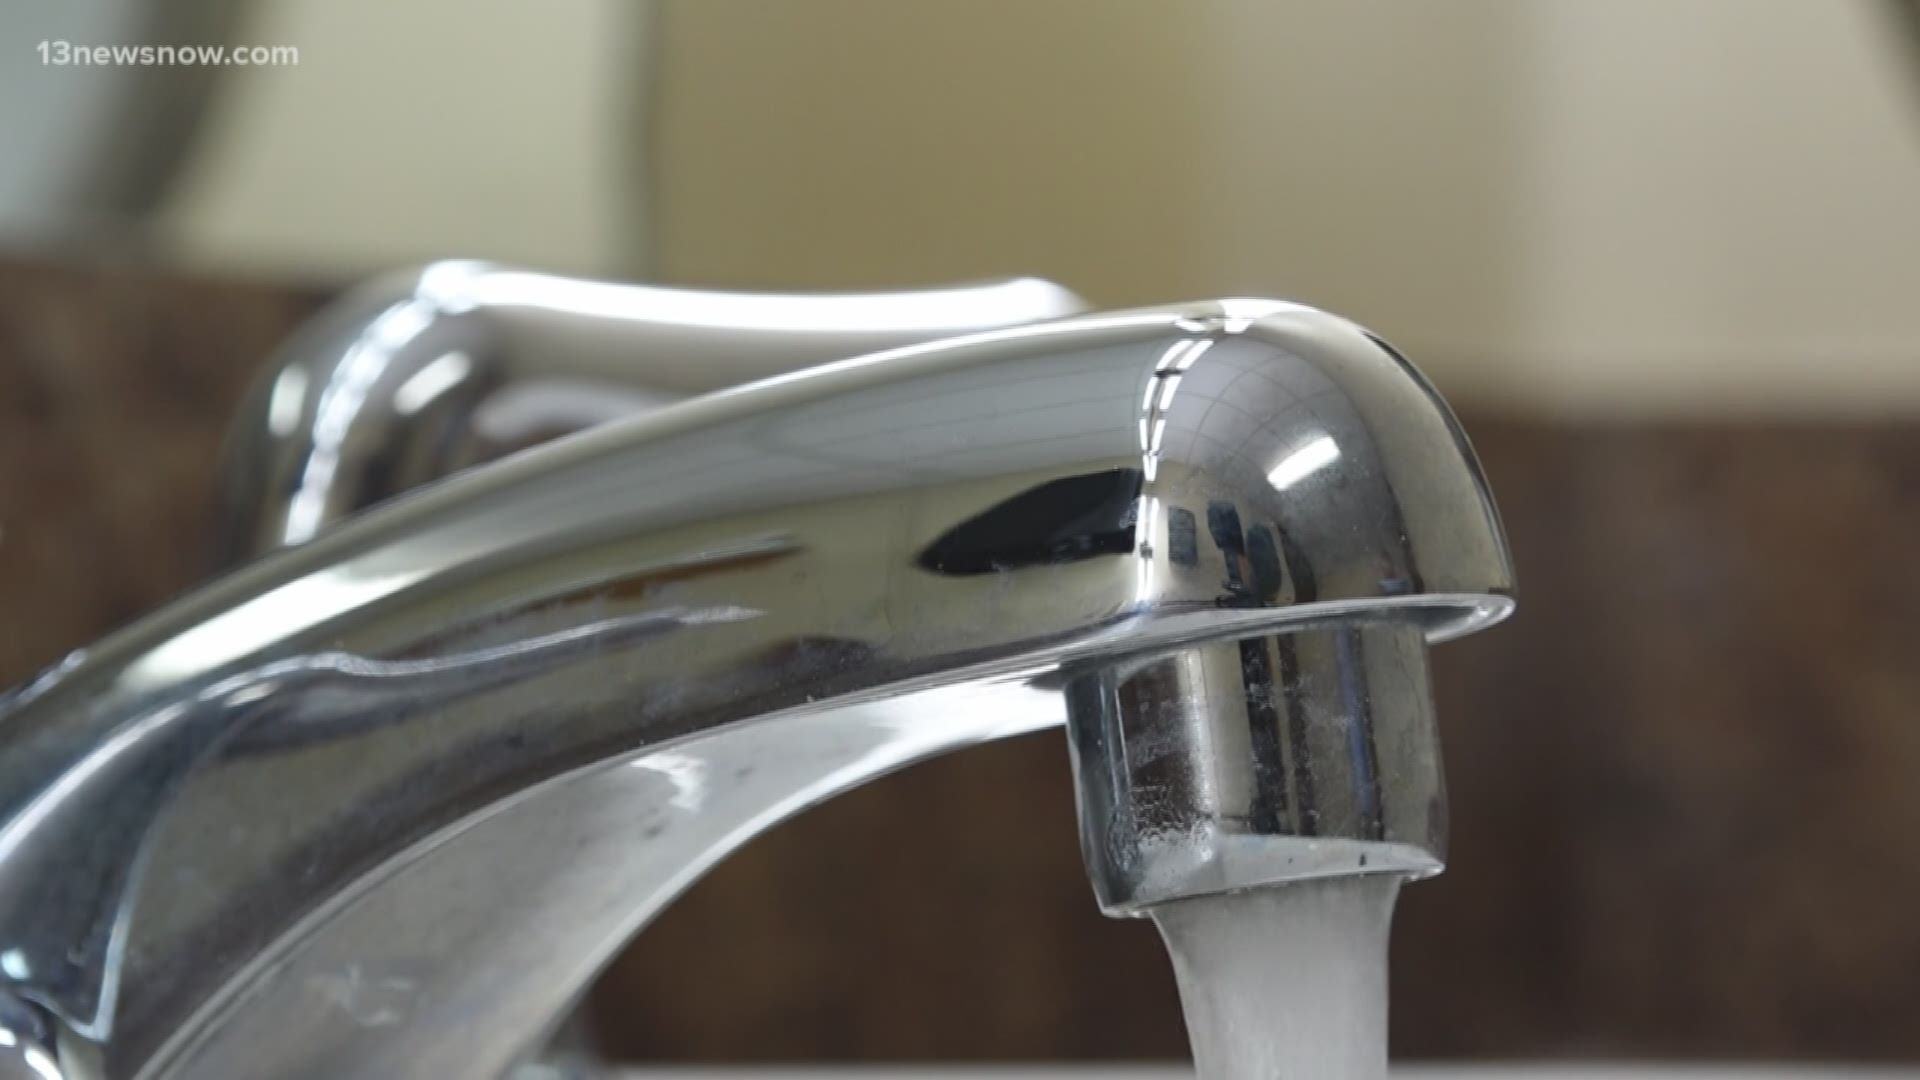 Lead testing continues at different water sources in several Virginia Beach schools. Data from only six schools has been released so far.